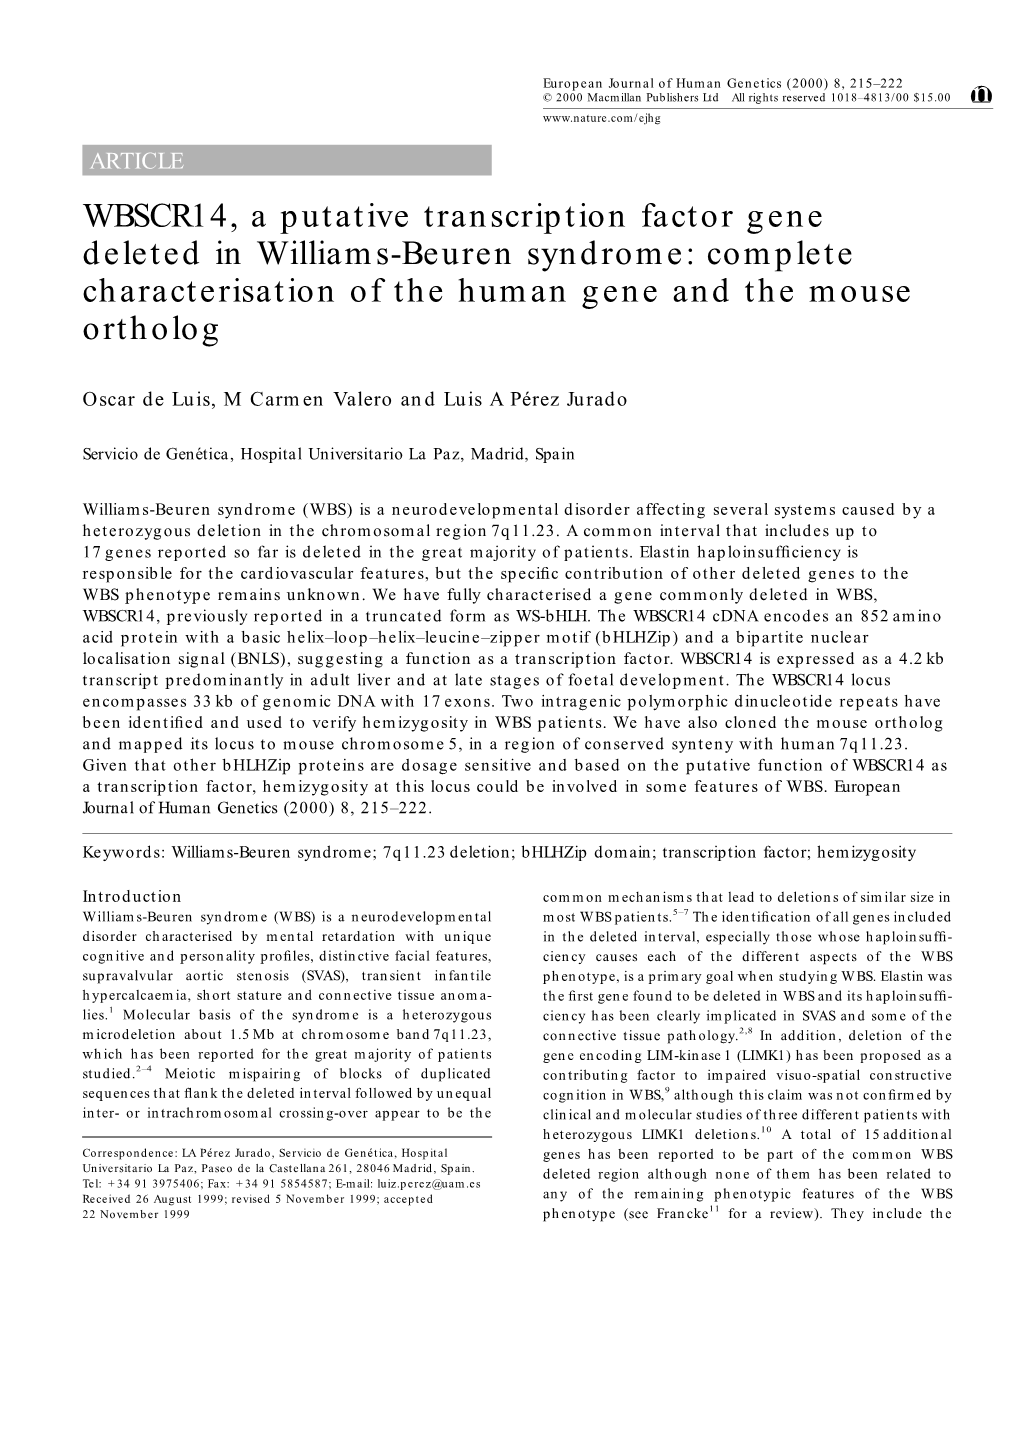 WBSCR14, a Putative Transcription Factor Gene Deleted in Williams-Beuren Syndrome: Complete Characterisation of the Human Gene and the Mouse Ortholog